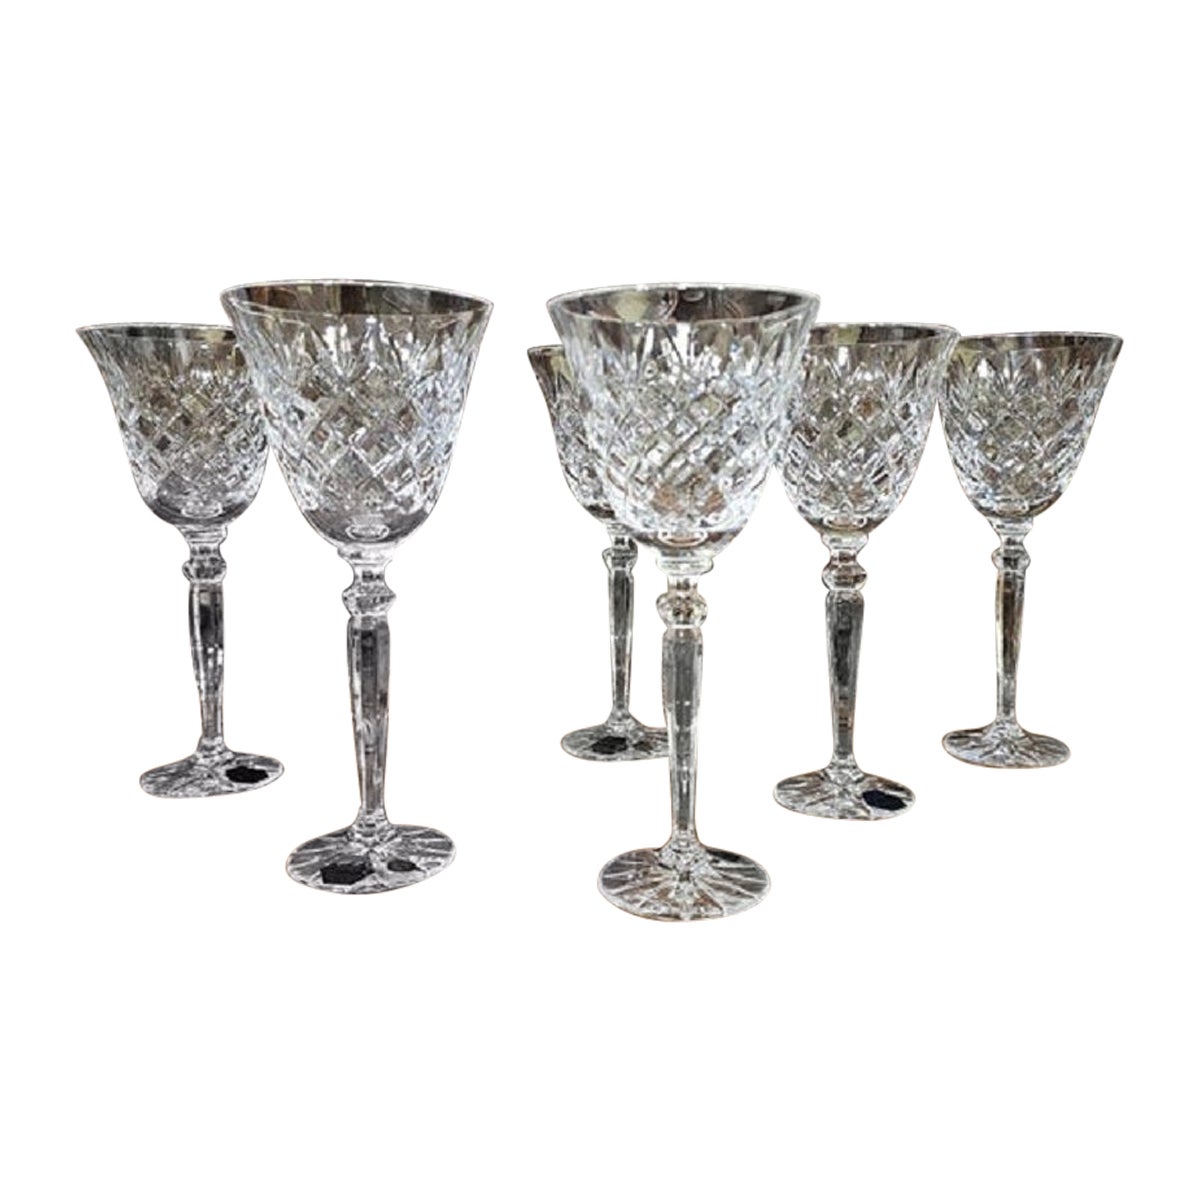 Set of 6 Crystal Wine or Water Glasses (9.5 fl_oz) - hand crafted For Sale